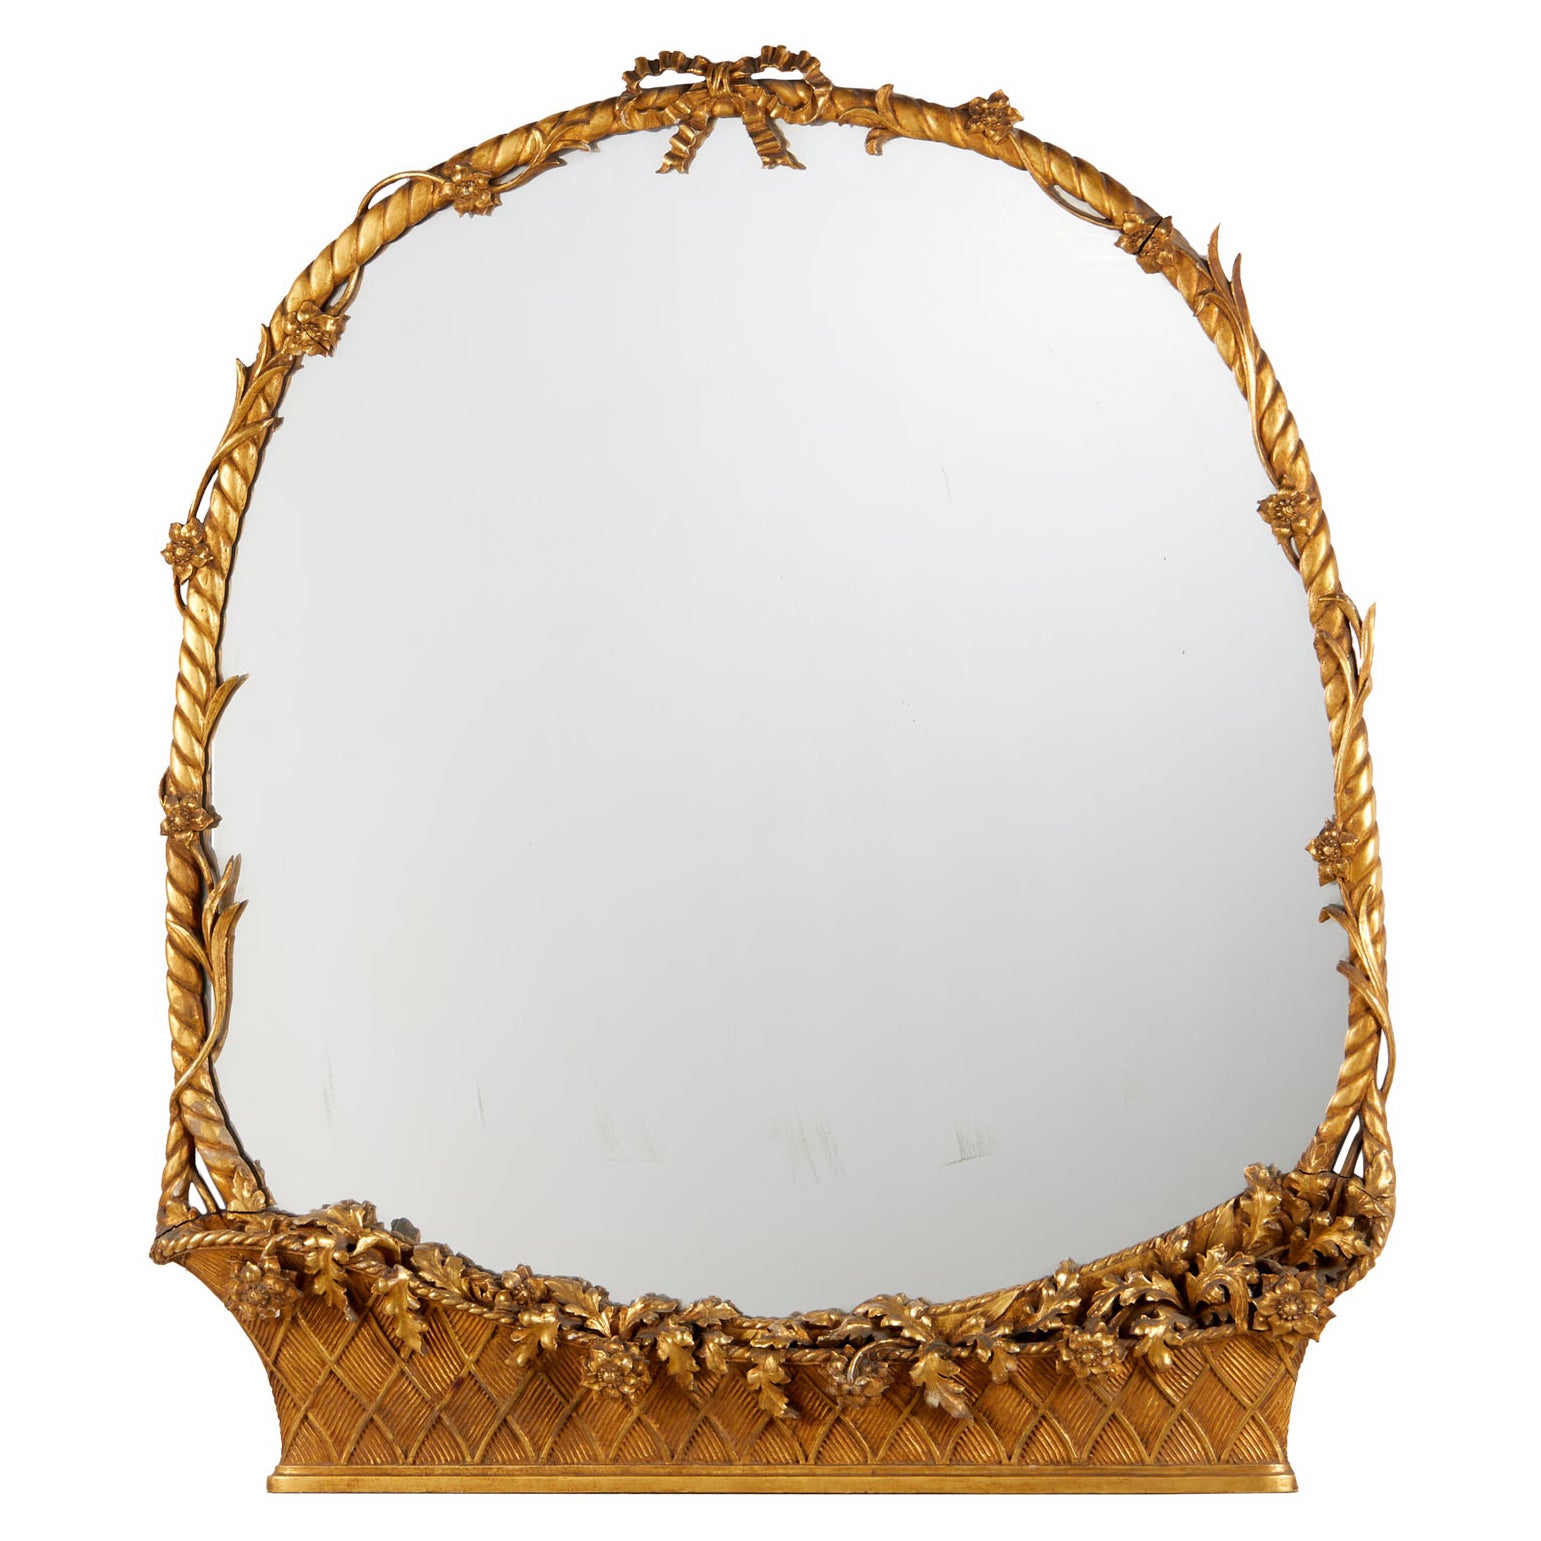 Vintage Louis XVI Style Italian Giltwood Wall Mirror in Floral Basket Form For Sale